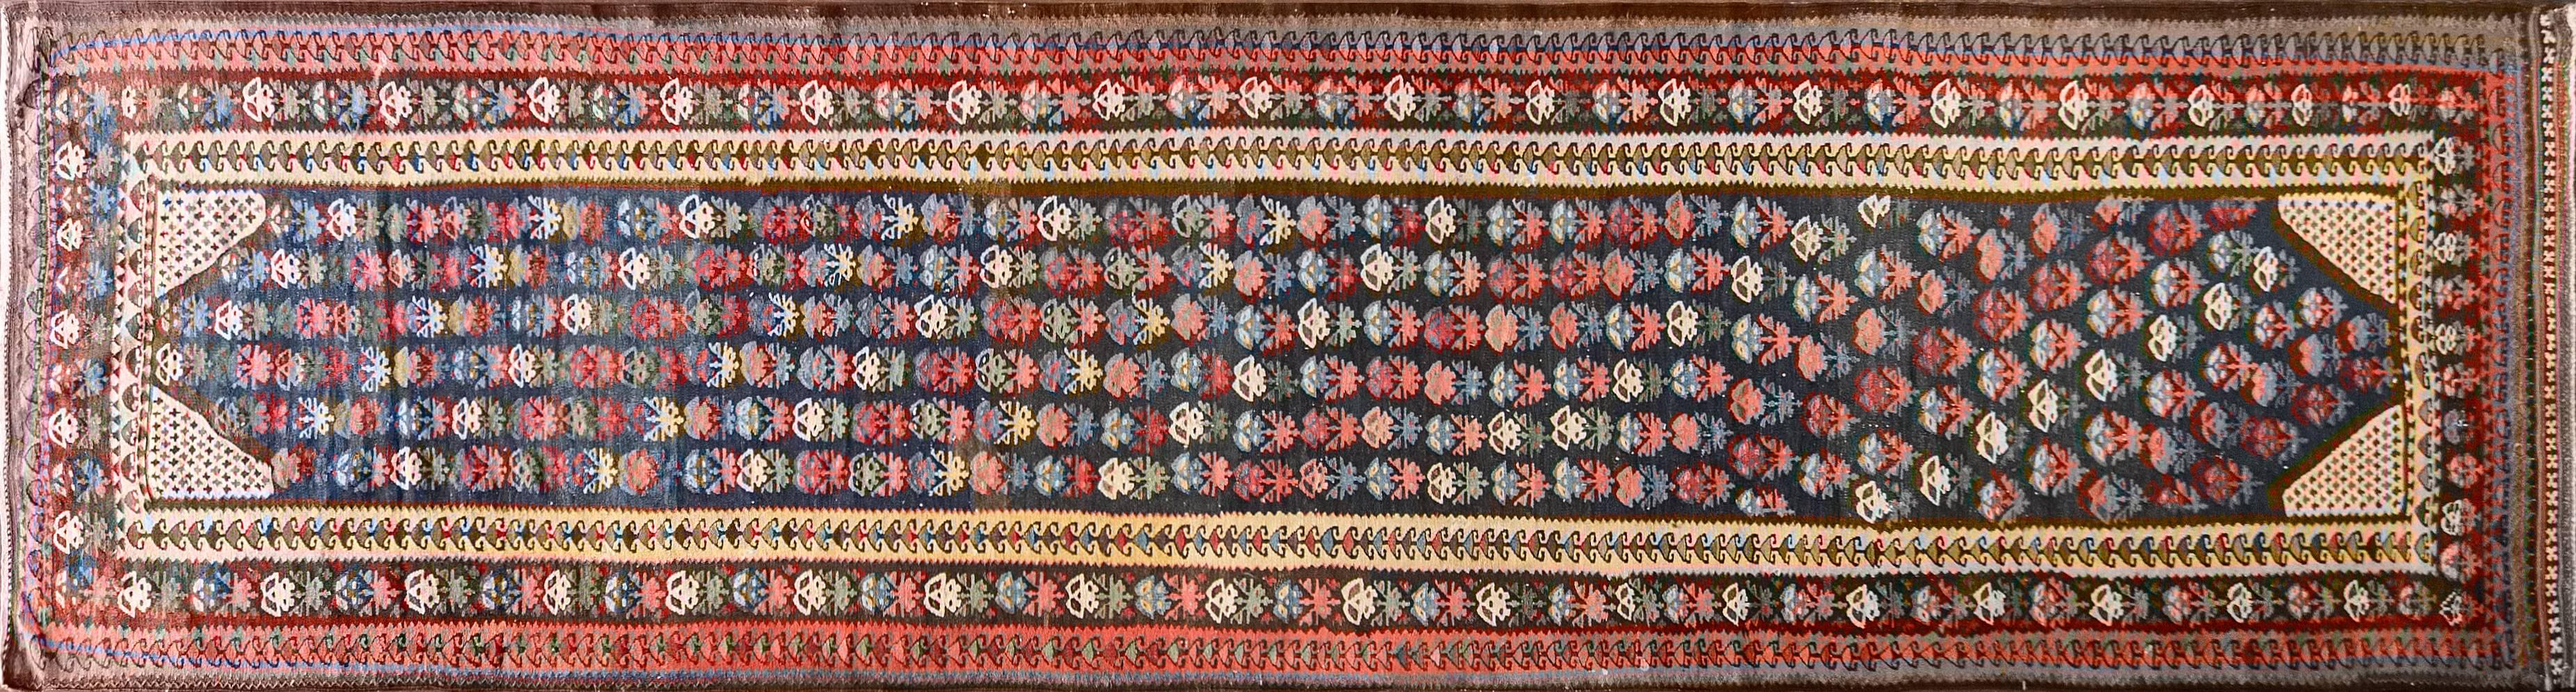 Soumak is a tapestry technique of weaving strong and decorative textiles used as rugs and domestic bags. Baks used for bedding are known as Soumak Mafrash. Soumak is a type of flat-weave, somewhat resembling but stronger and thicker than Kilim, with